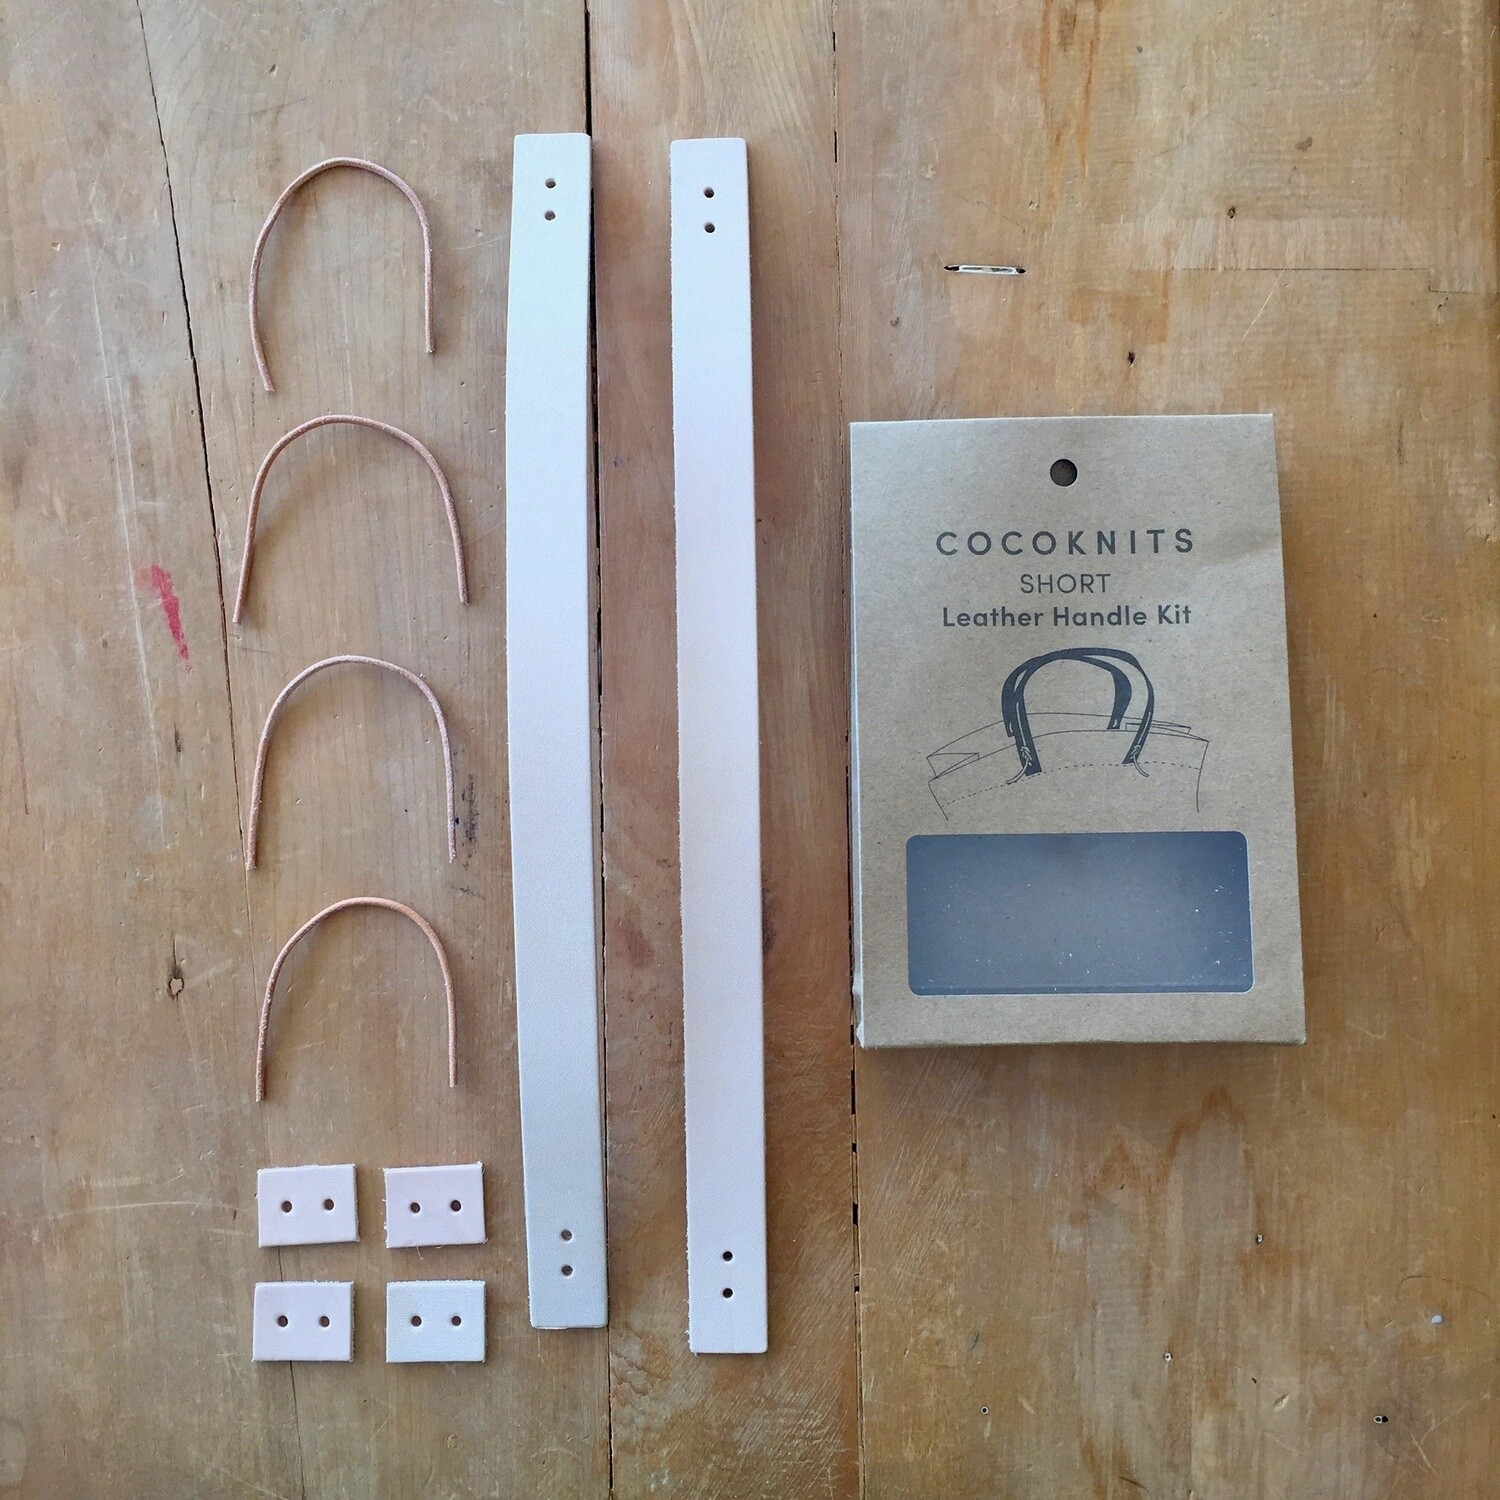 Cocoknits Leather Handle Kit